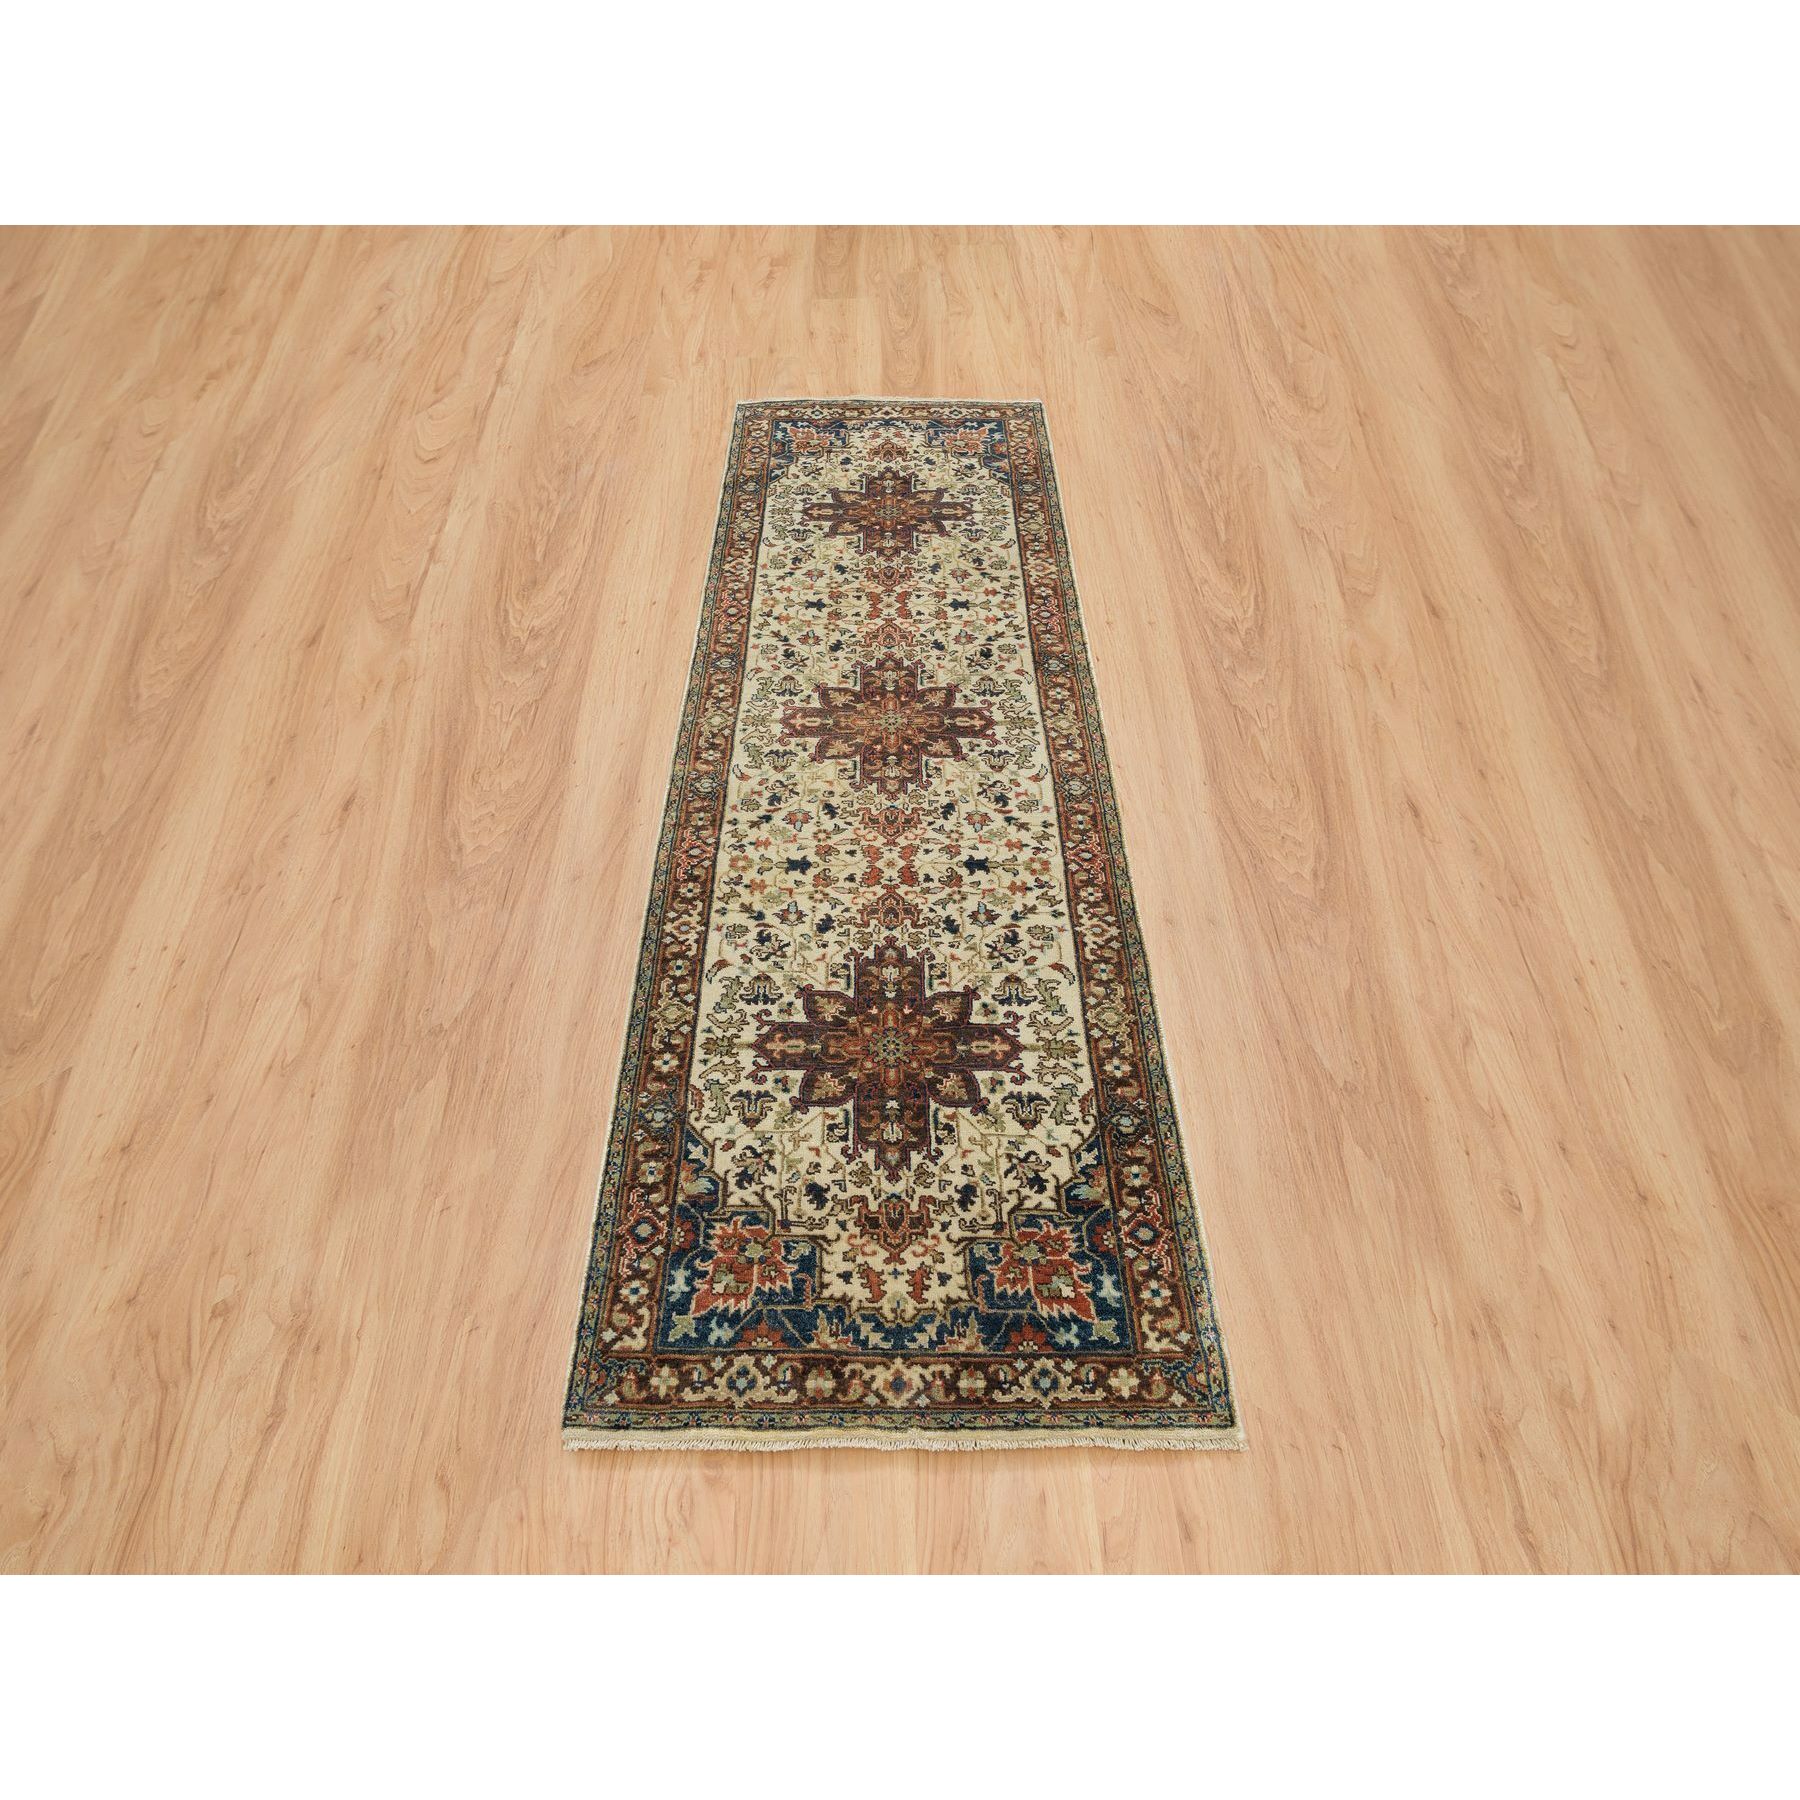 2'6"x8'3" Beige, Extra Soft Wool, Hand Woven, Antiqued Heriz Re-Creation with Geometric Medallions, Runner Oriental Rug 